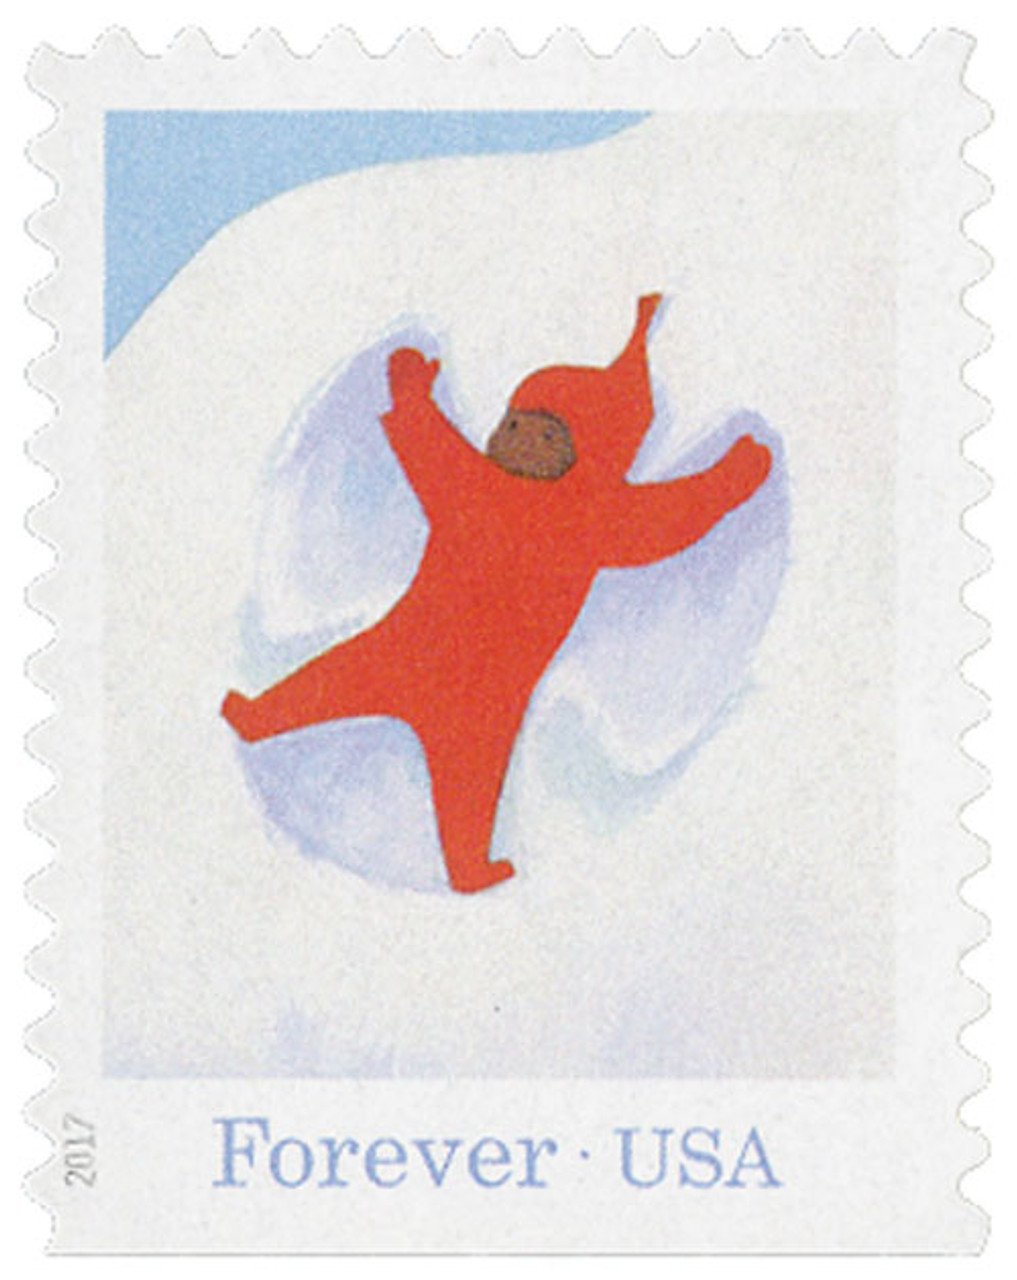 US Stamp 2017 Snowy Day by Ezra Jack Keats Booklet of 20 Forever Stamps  #5246b